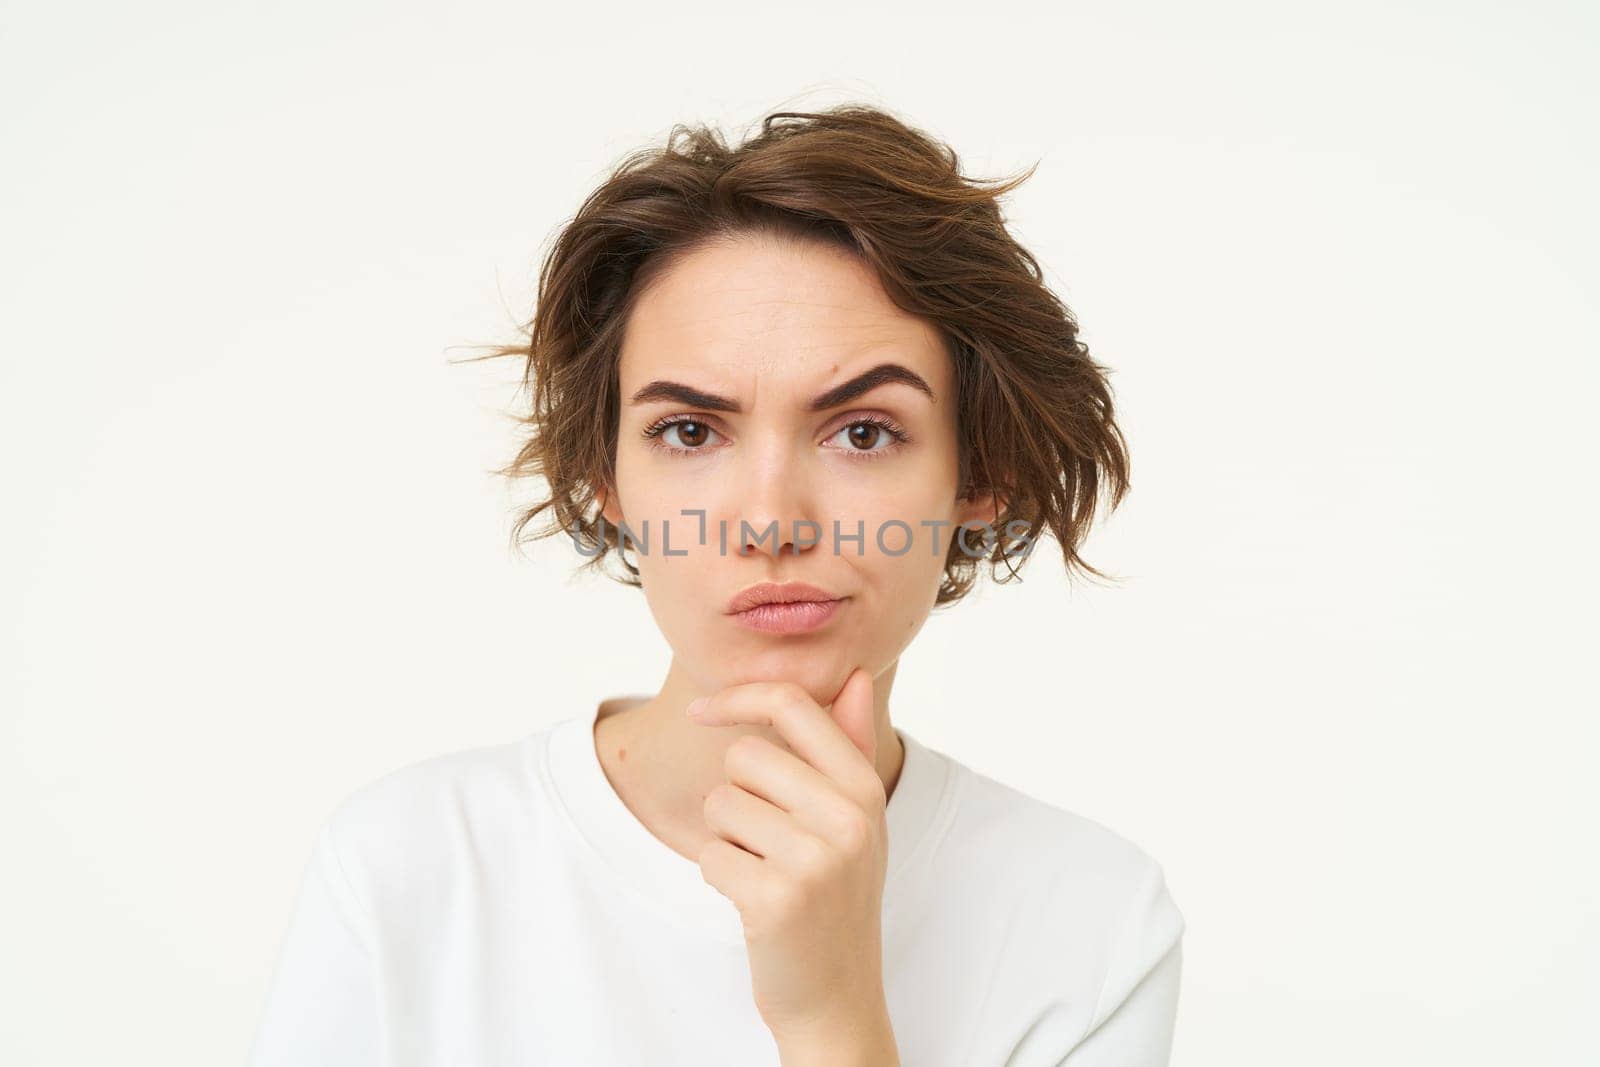 Portrait of thinking woman, touches her chin, looks serious and thoughtful, poses over white background. Copy space